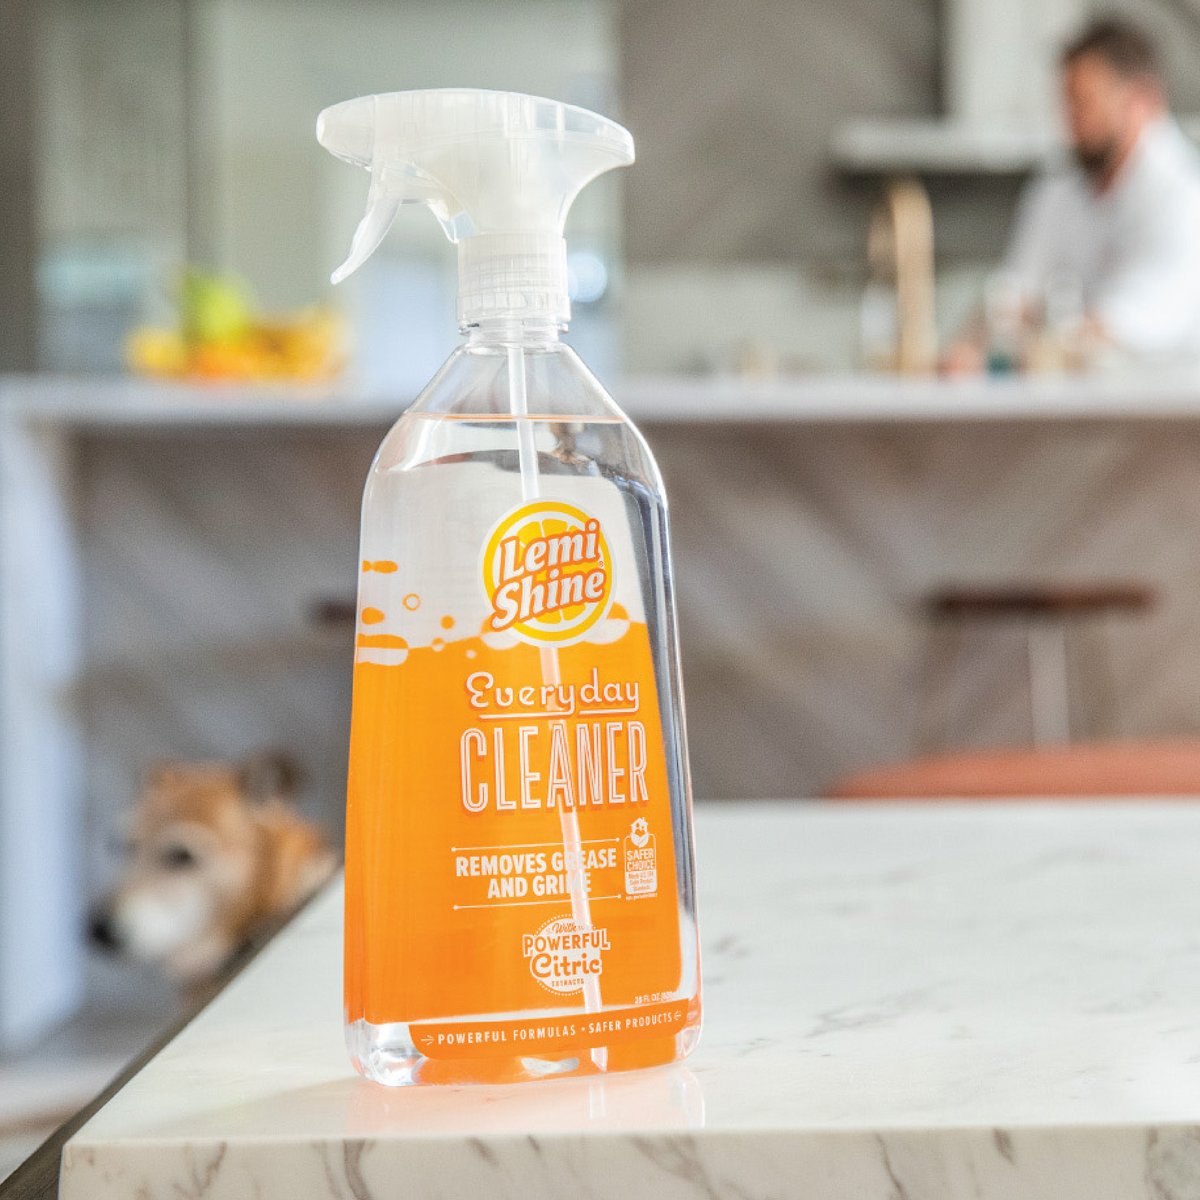  Lemi Shine Appliance Cleaner & Deodorizer, Powered by Citric  Acid, 100% Guaranteed To Clean